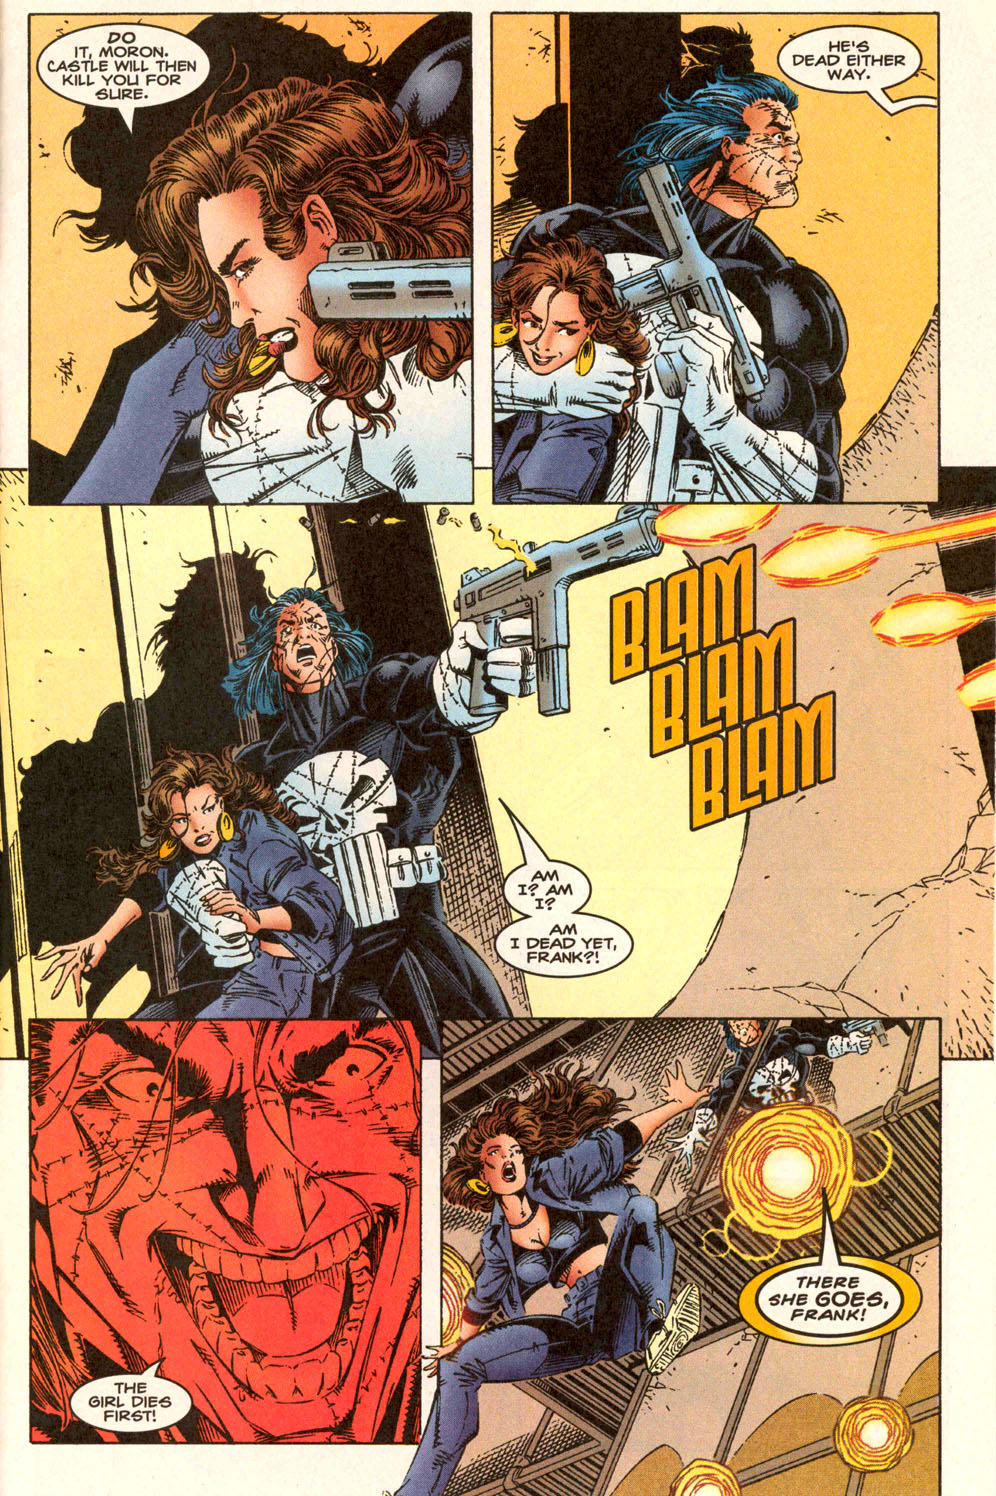 Punisher (1995) issue 10 - Last Shot Fired - Page 20